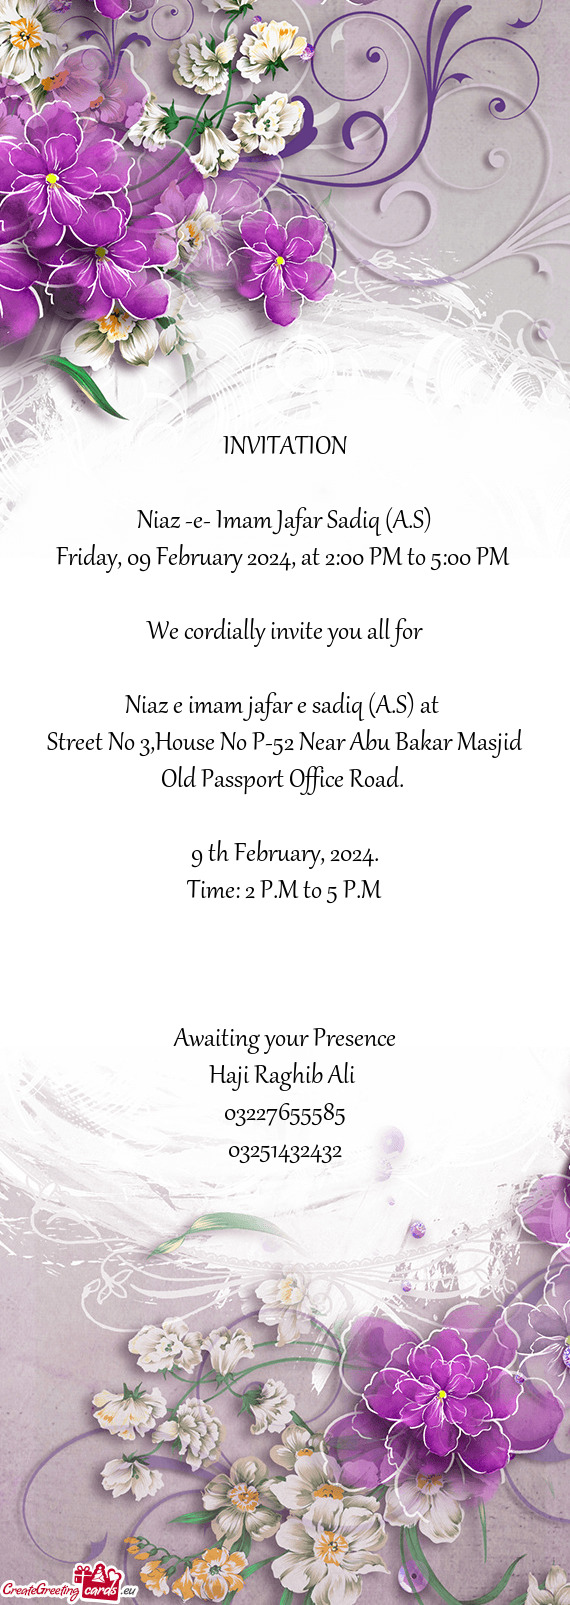 Friday, 09 February 2024, at 2:00 PM to 5:00 PM